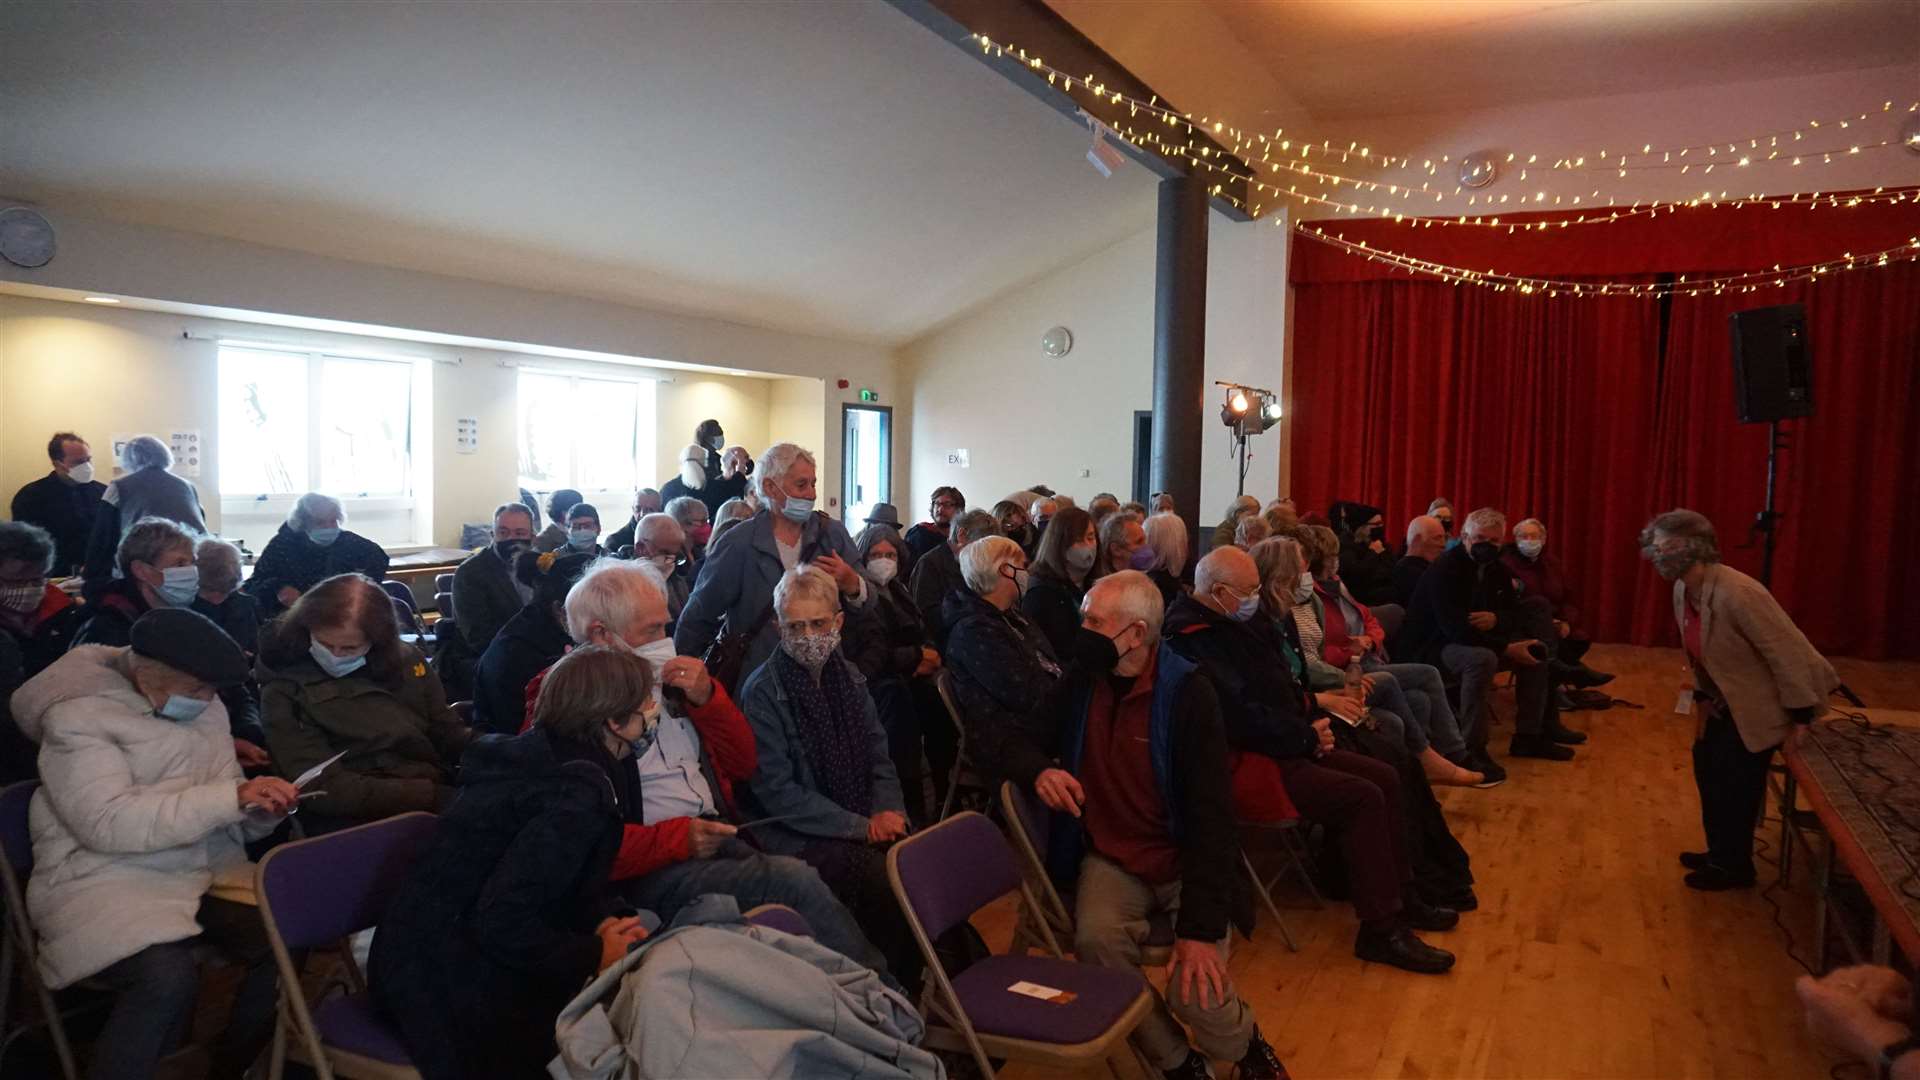 A very busy first session kicks off the first day at the Ullapool Book Festival 2022. Picture by: Federica Stefani